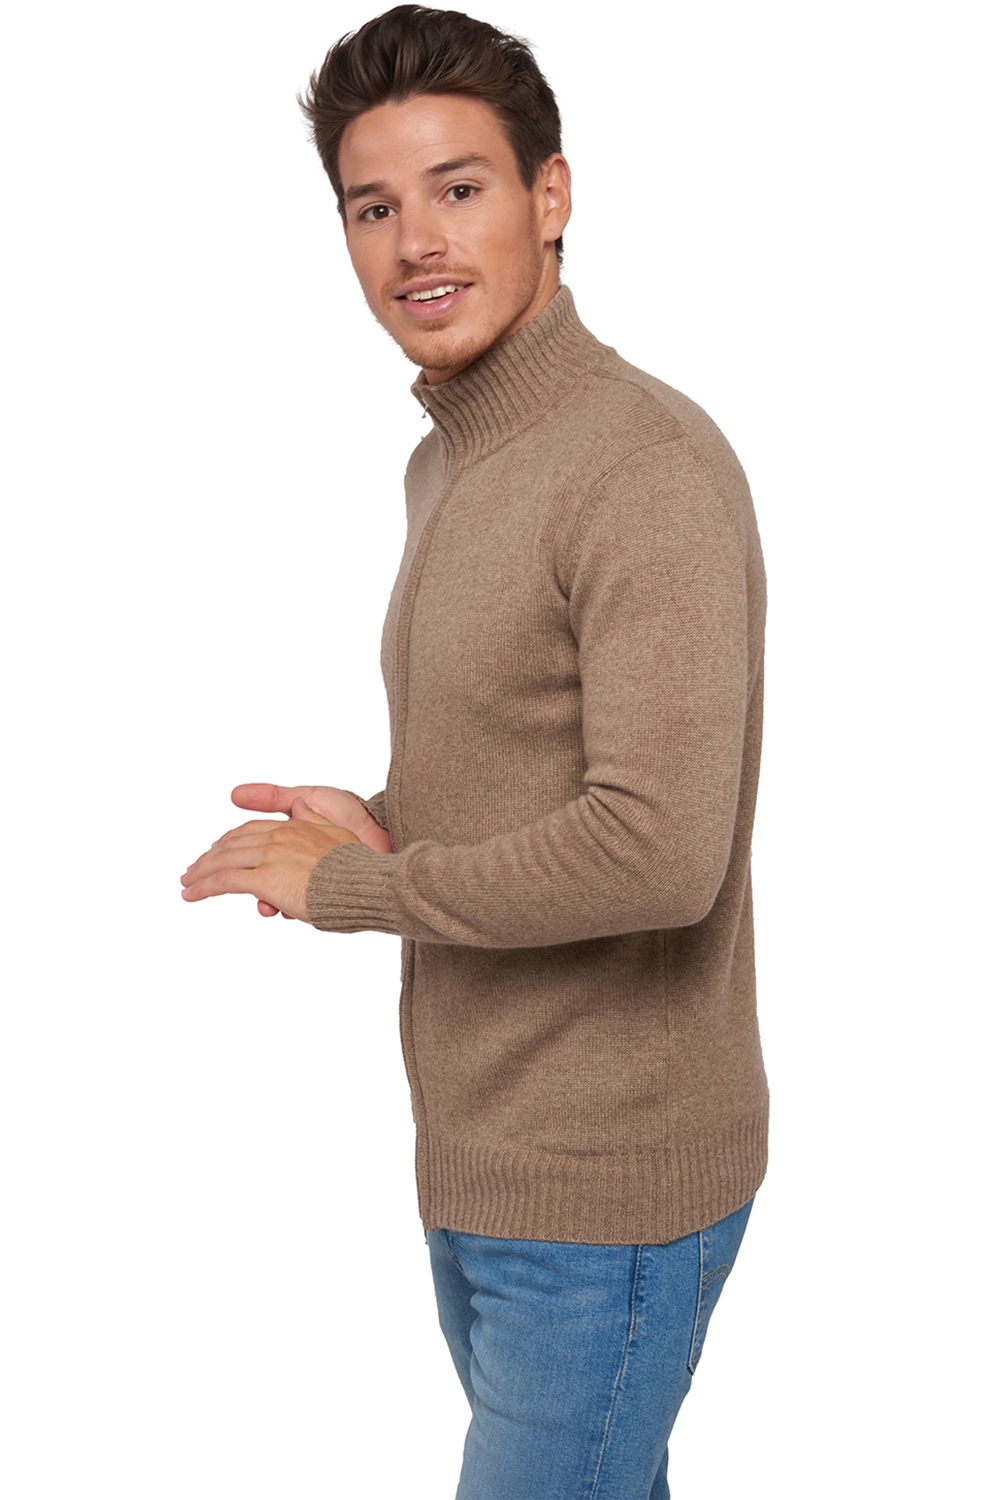 Cashmere men chunky sweater maxime natural brown natural beige s